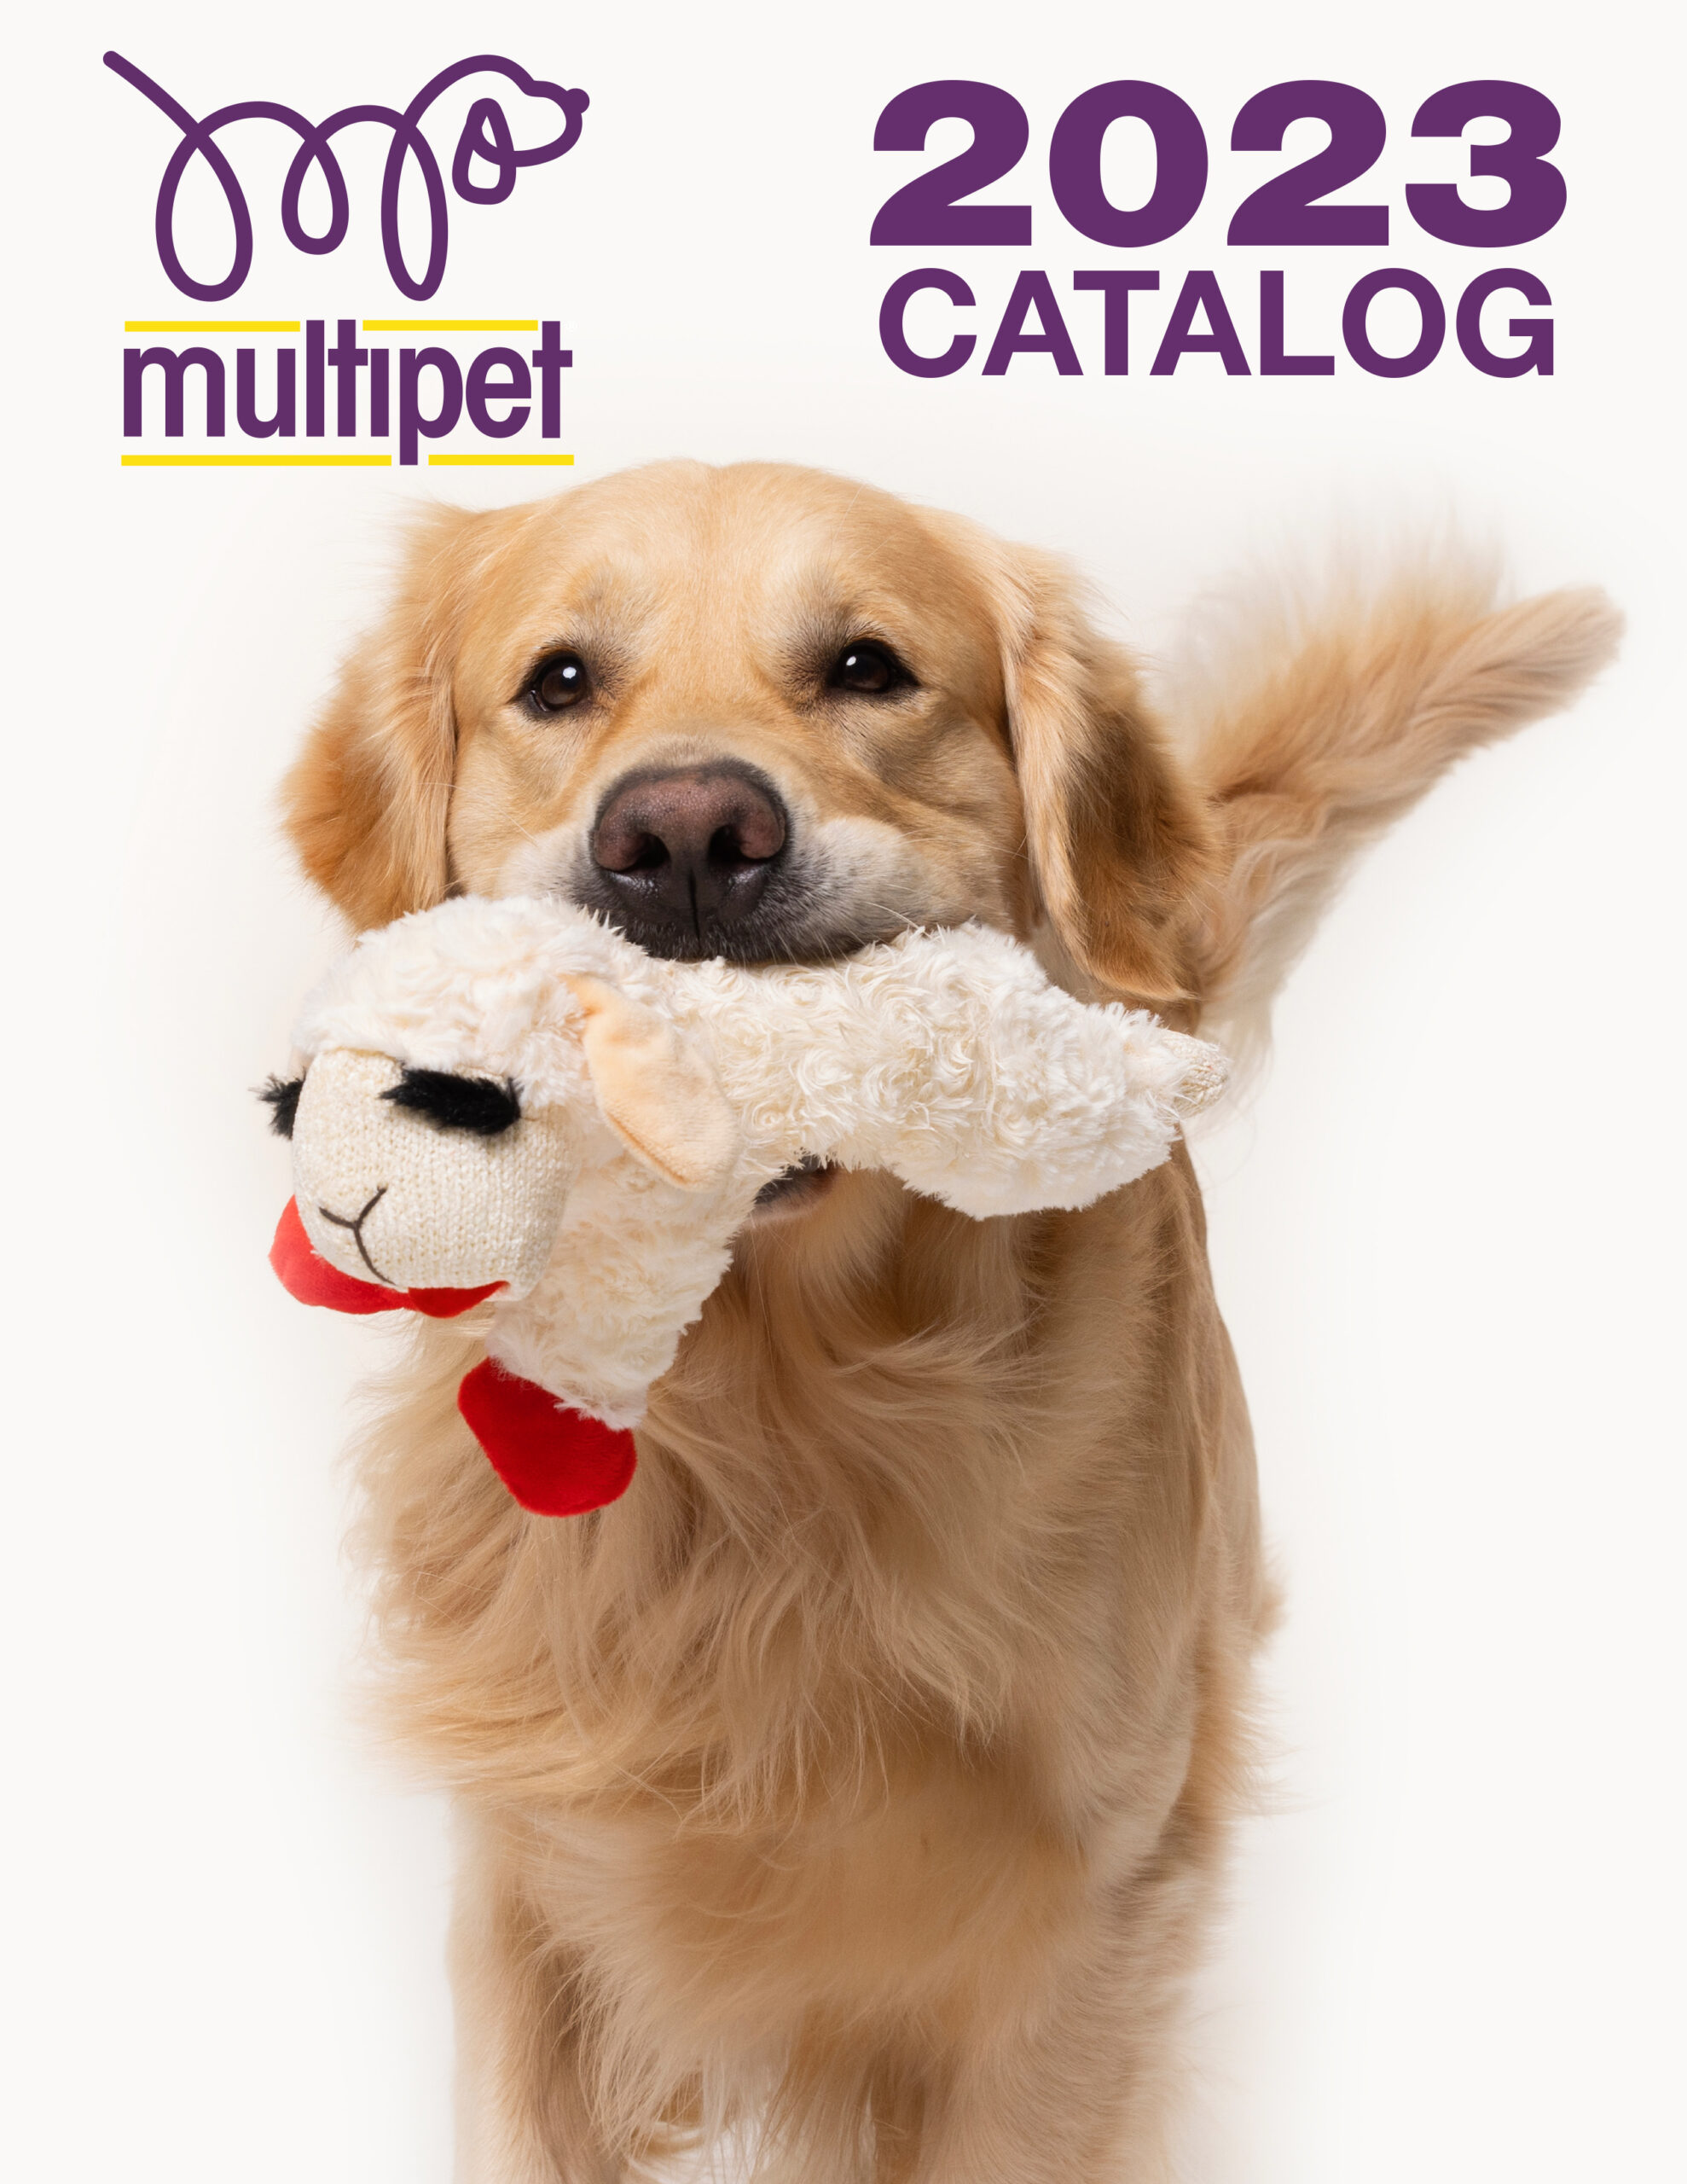 KONG Products Catalogue, Quality Pet Products